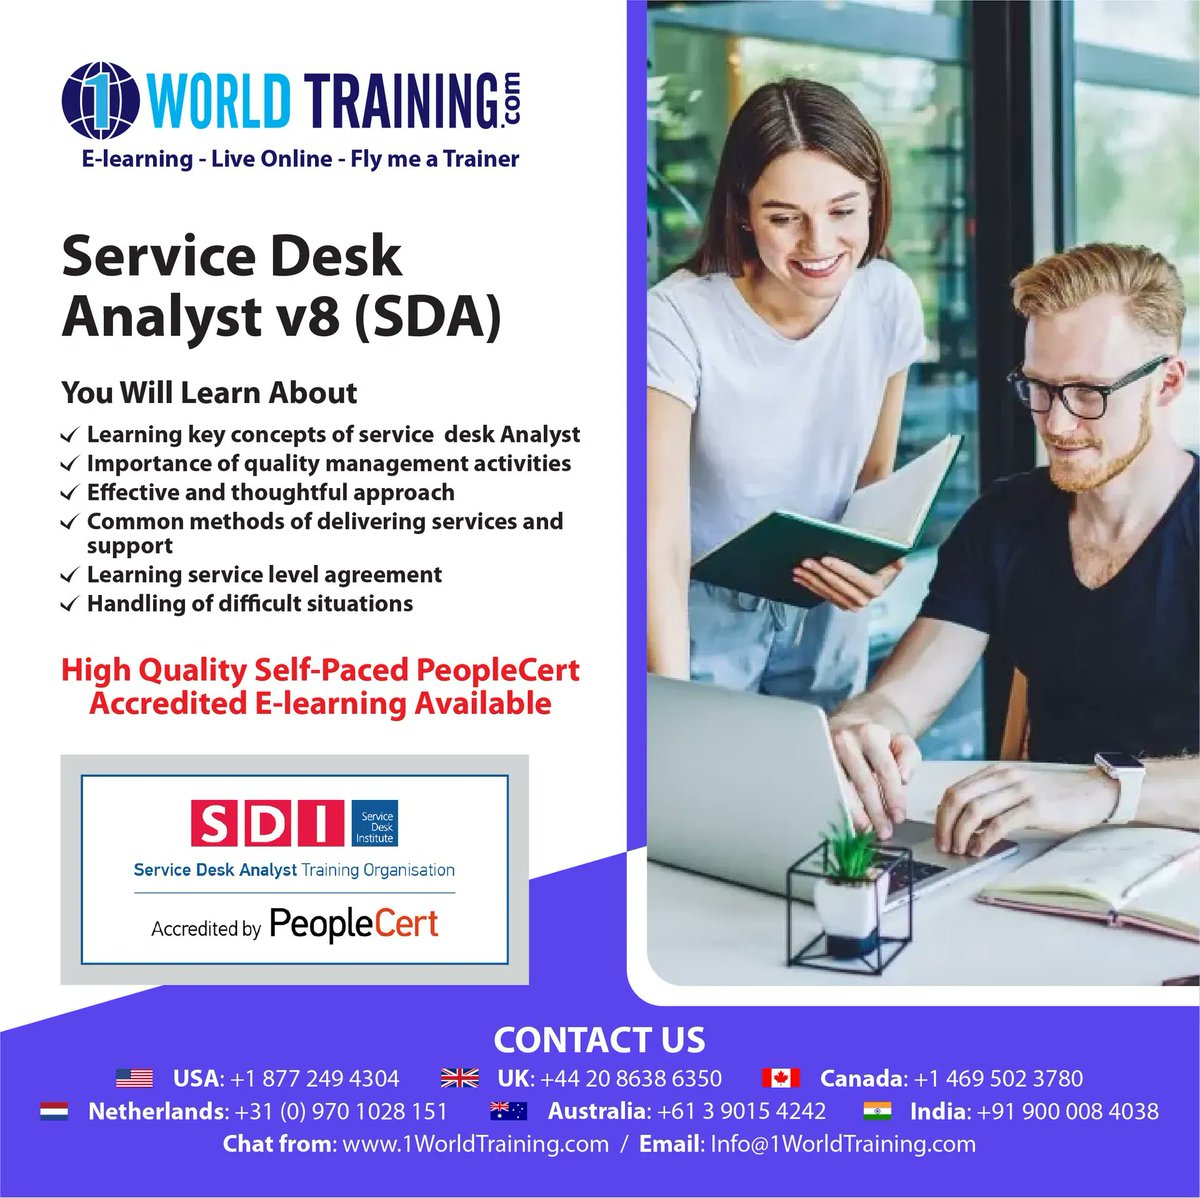 Service Desk Analyst SDA V8. Technical backhand support for users. Single point contact for any system related issue. Provide help for internal and external operational issues. #sdm #sda #v8 #peoplecert #axelos #1worldtraining #supportsystem